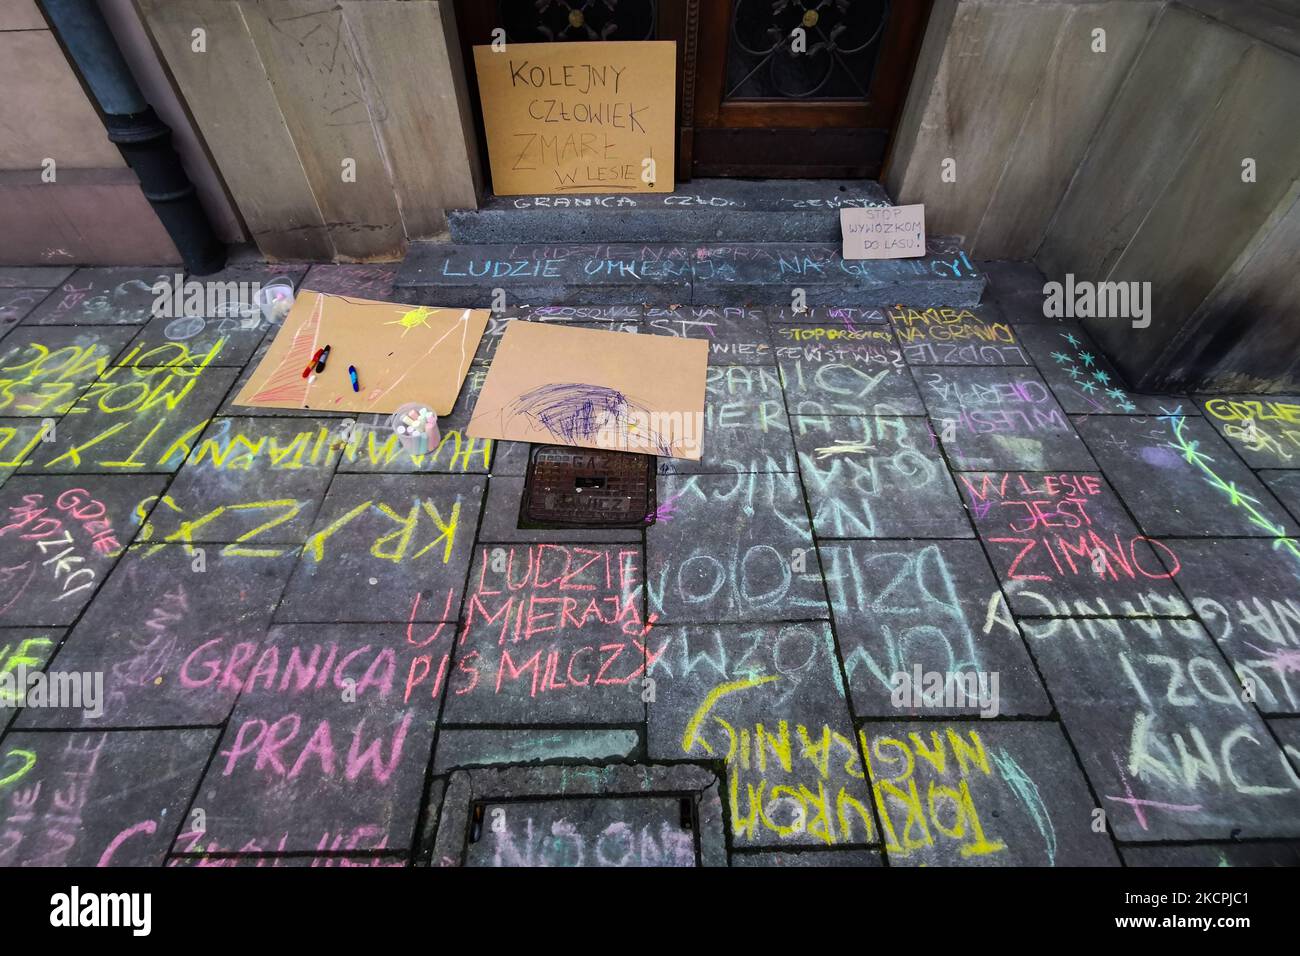 Chalk drawings and slogans were put on the pavement in front of Law and Justice (PiS) ruling party's office during a protest against the government's treatment of refugees, on the day when Syrian migrant was found dead on Polish-Belarusian border. Krakow, Poland on October 14, 2021. Few days before, a group of mothers with children, who are the representatives of 'Family Without Borders' initiative, made chalk drawings on the sidewalks in front of the headquarters of the Law and Justice party on Retoryka Street in Krakow. The police that arrived at the place, confiscated chalk and drawings wer Stock Photo